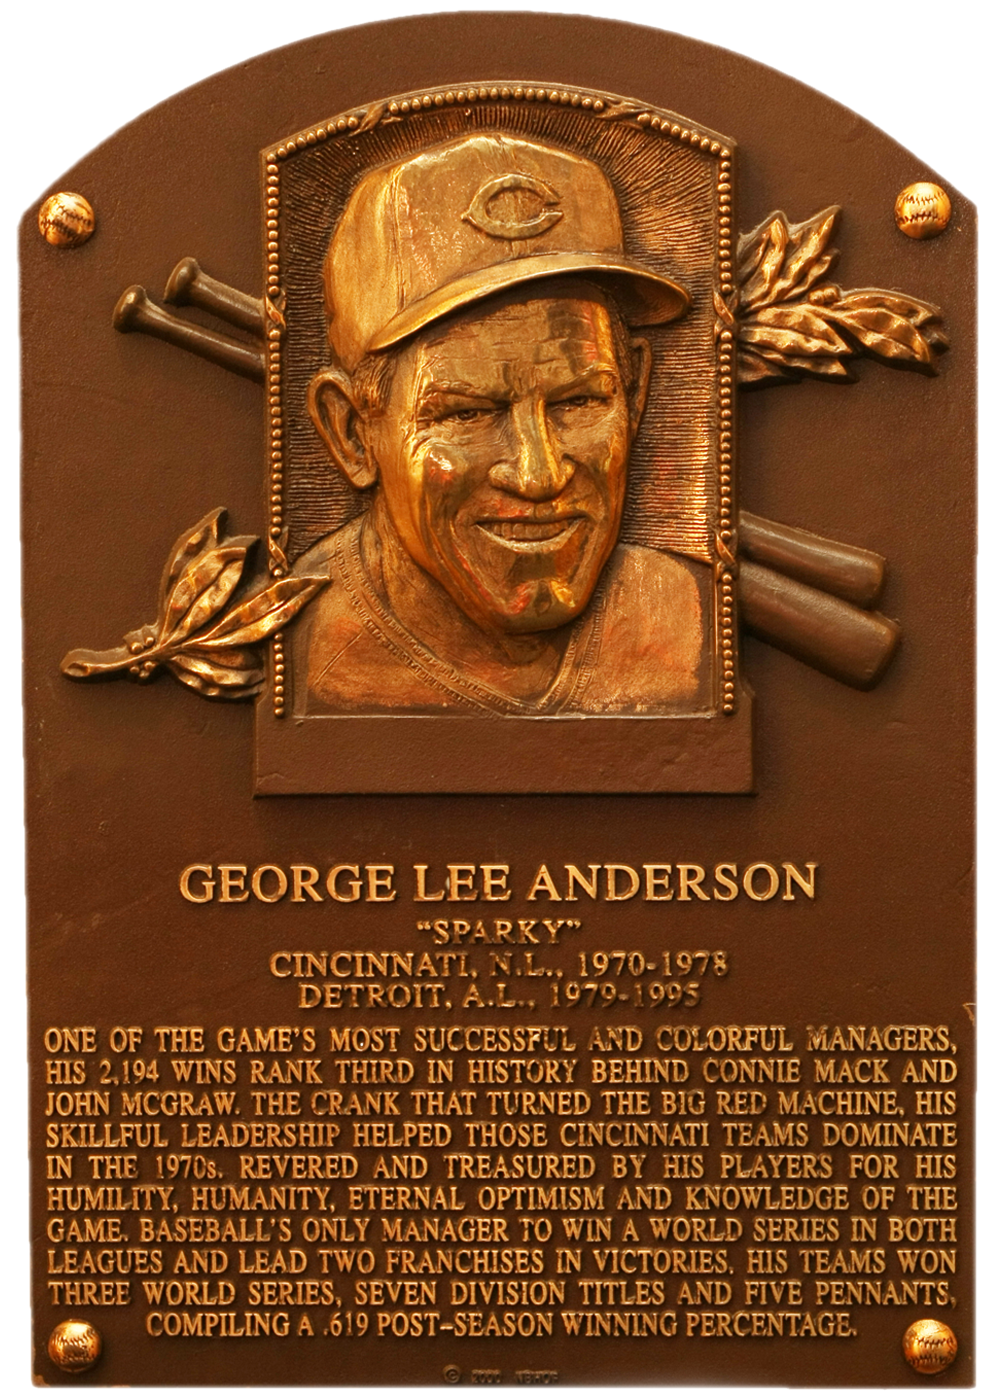 Sparky Anderson Hall of Fame plaque